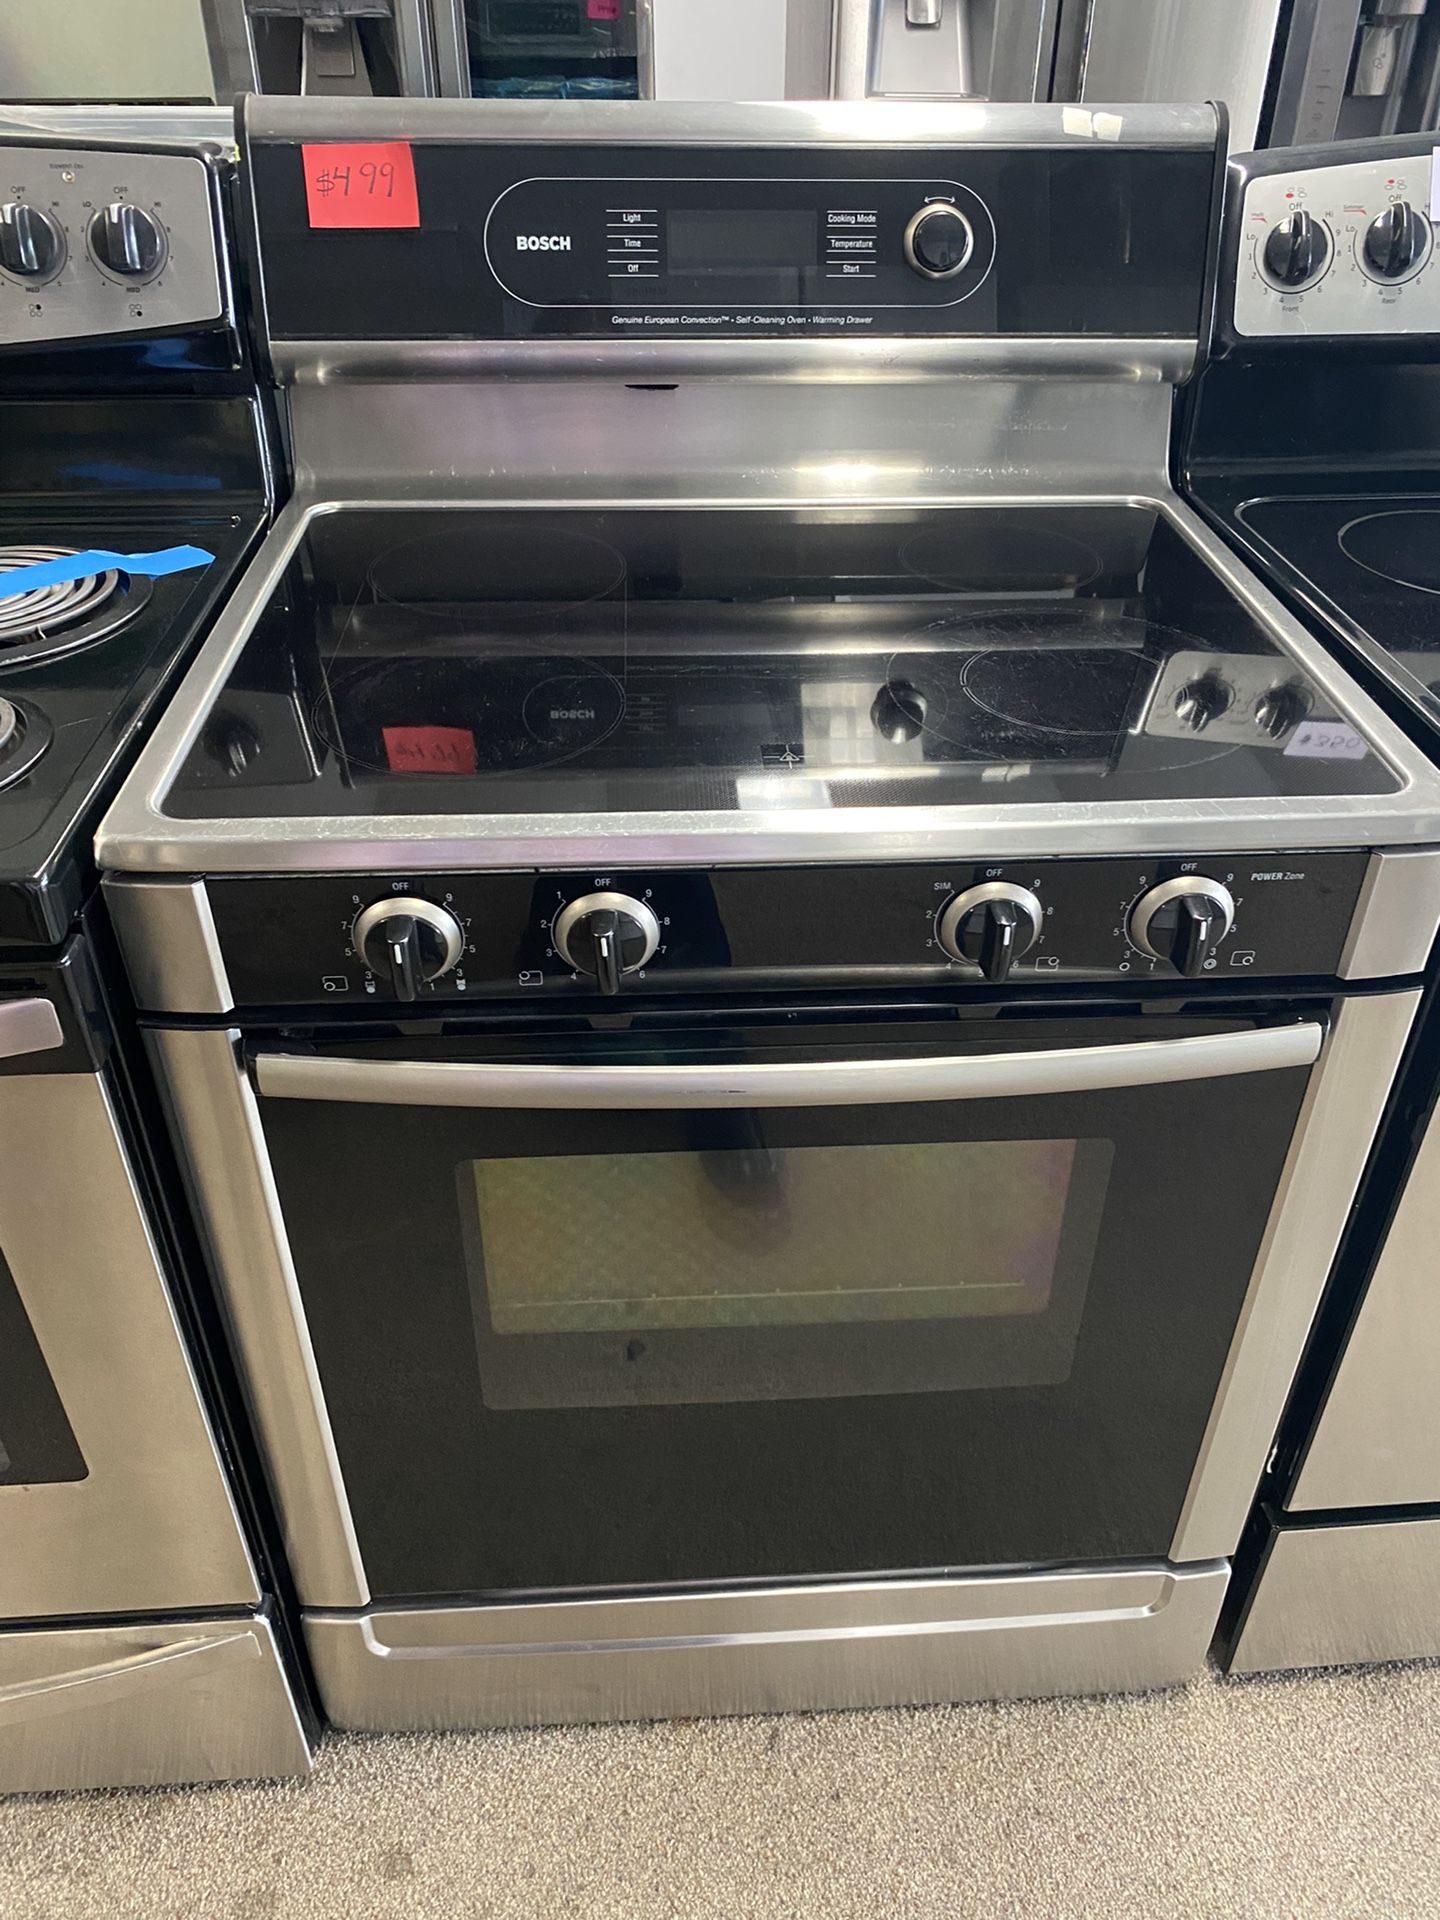 Bosch Electric Stove Used Excellent Working Conditions 